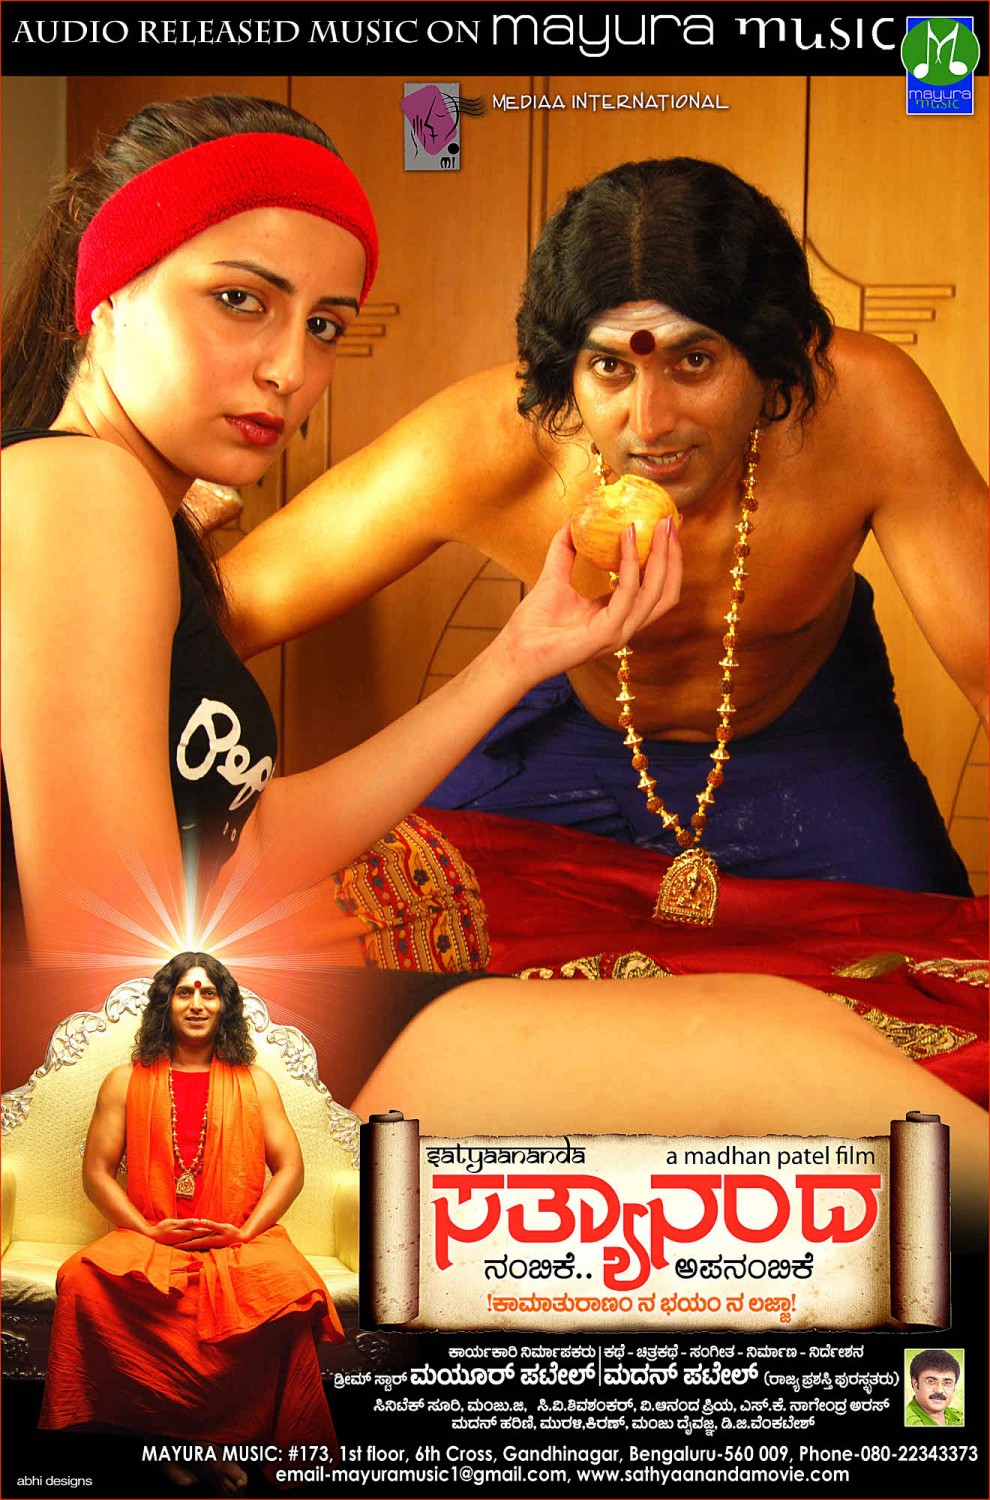 Extra Large Movie Poster Image for Sathyaananda (#2 of 17)